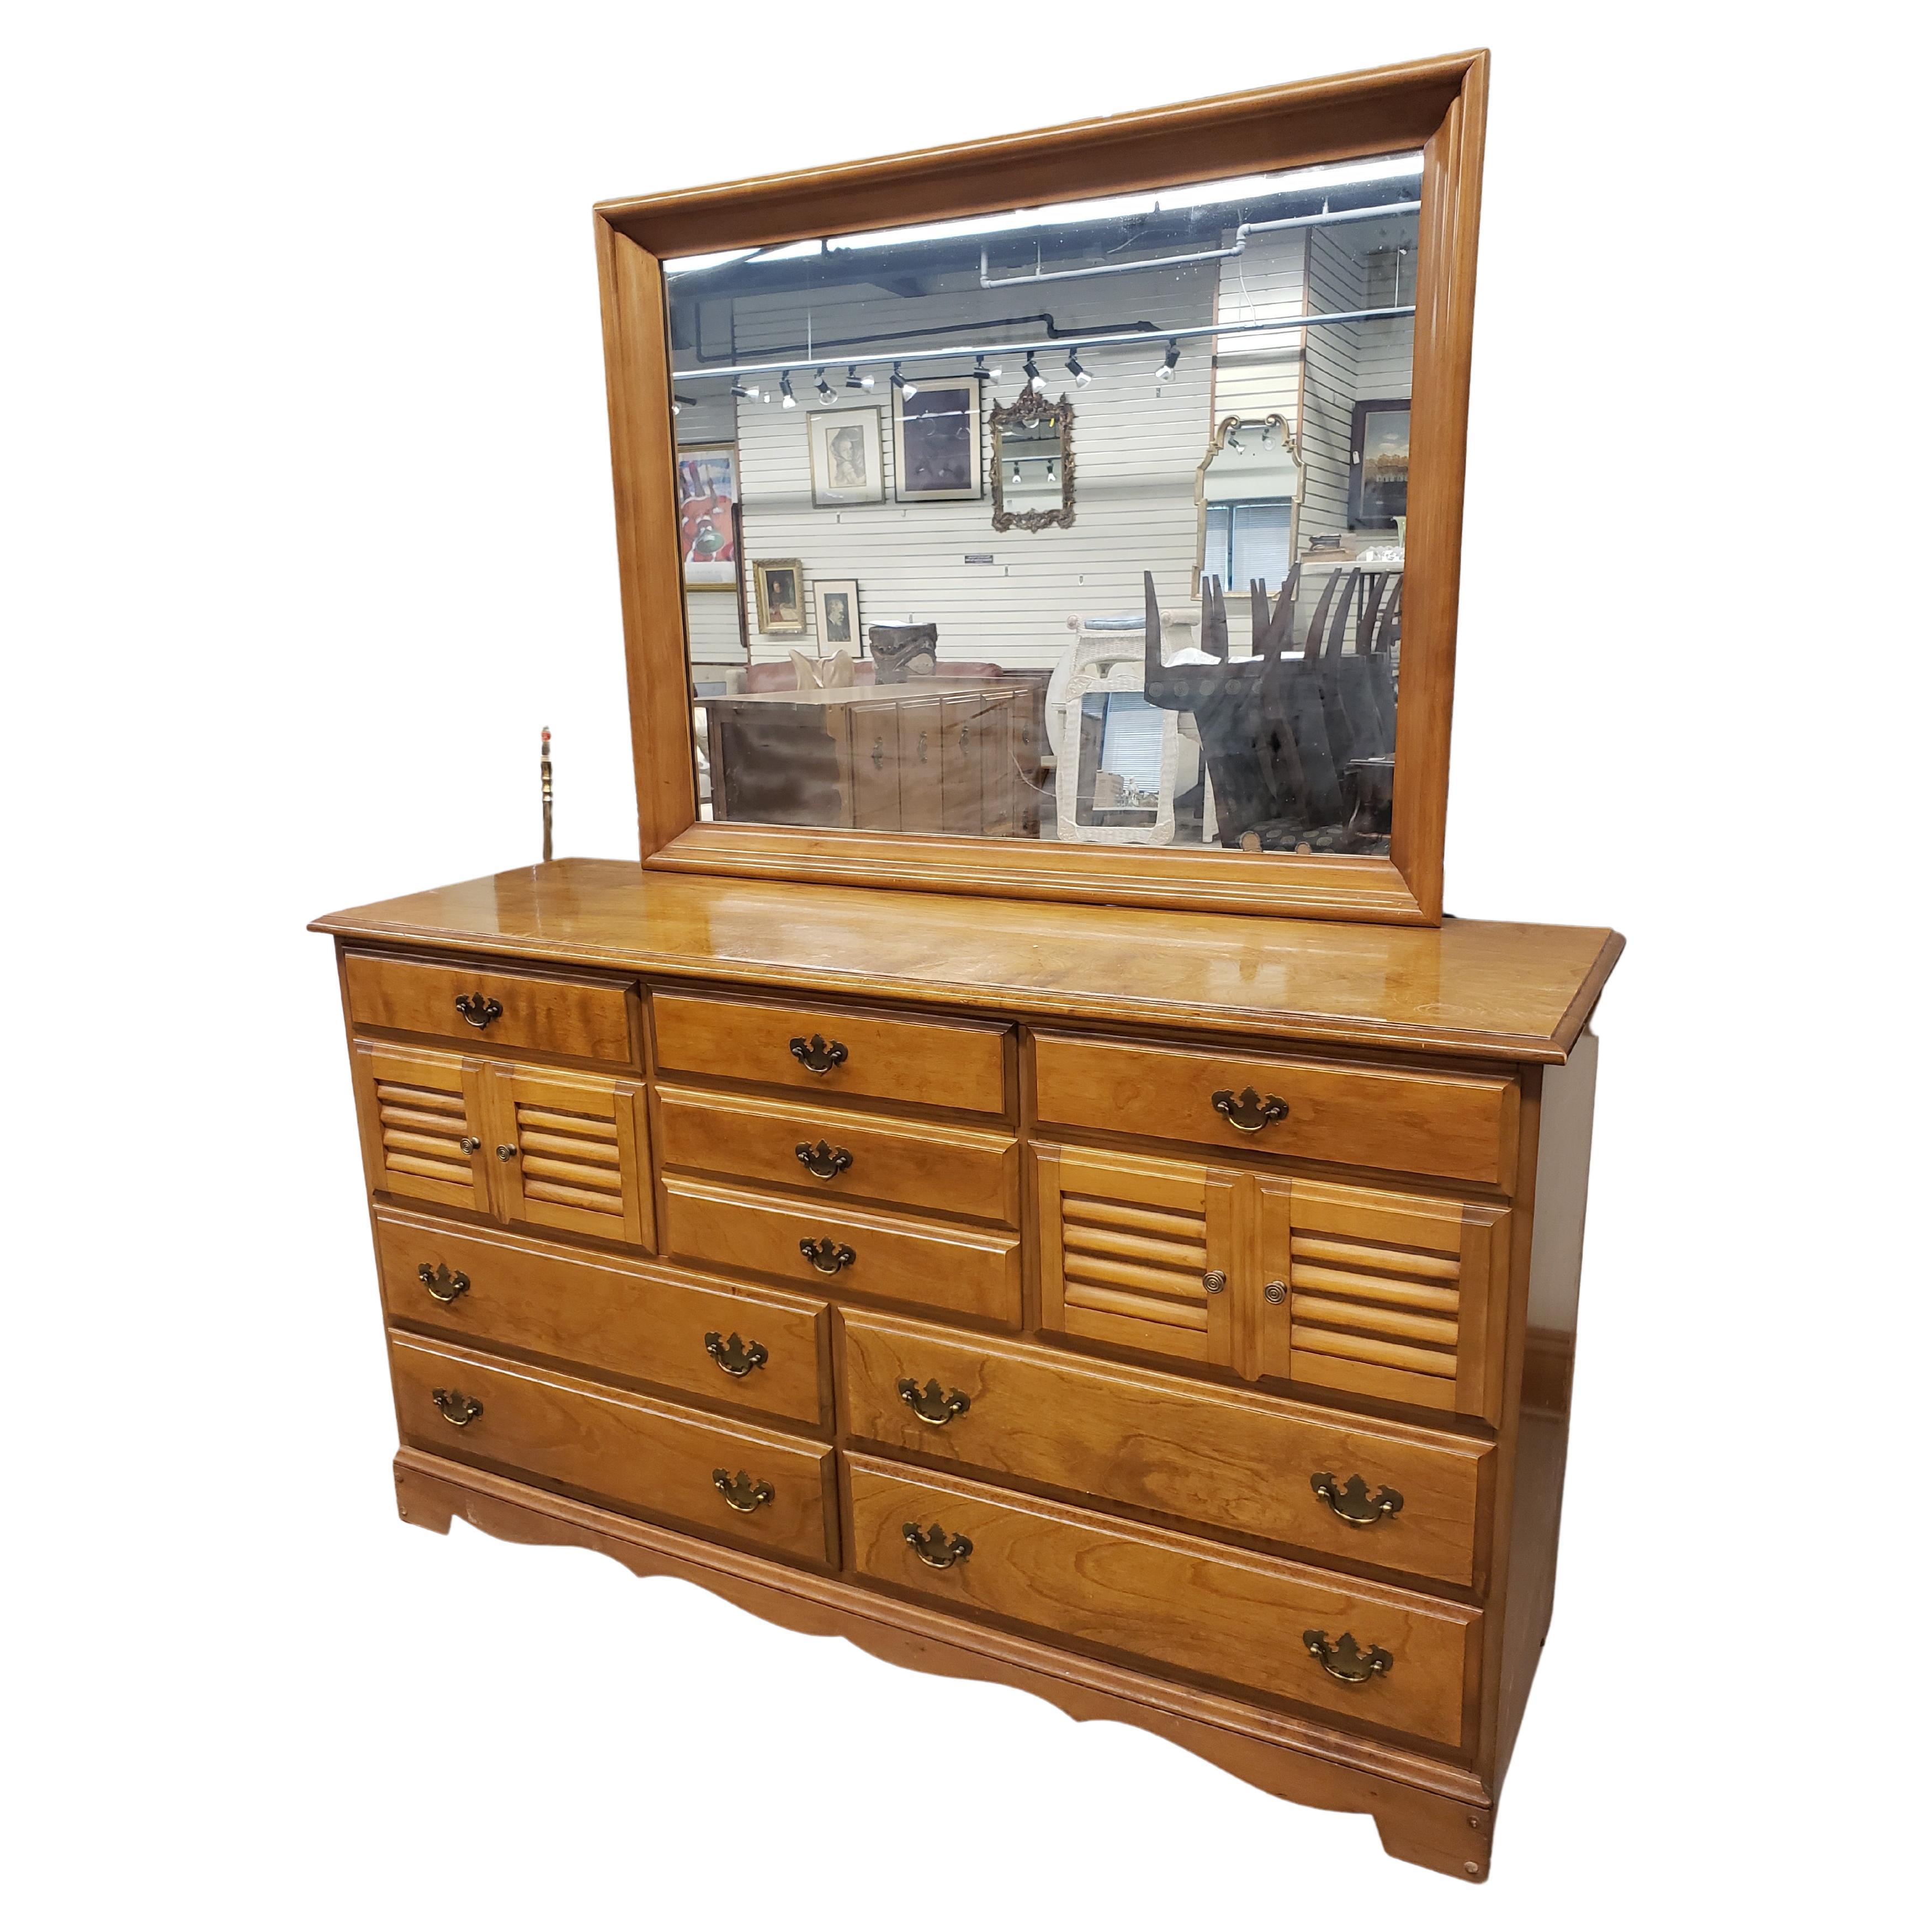 A 1960s BP John maple dresser in very good vintage condition. Measures 60 inches in width, 19 inches in depth and 34.5 inches tall without mirror, 69.5 inches tall with mirror. Mirror is 45 inches in width and 35 inches in height. And 2.75 inches in